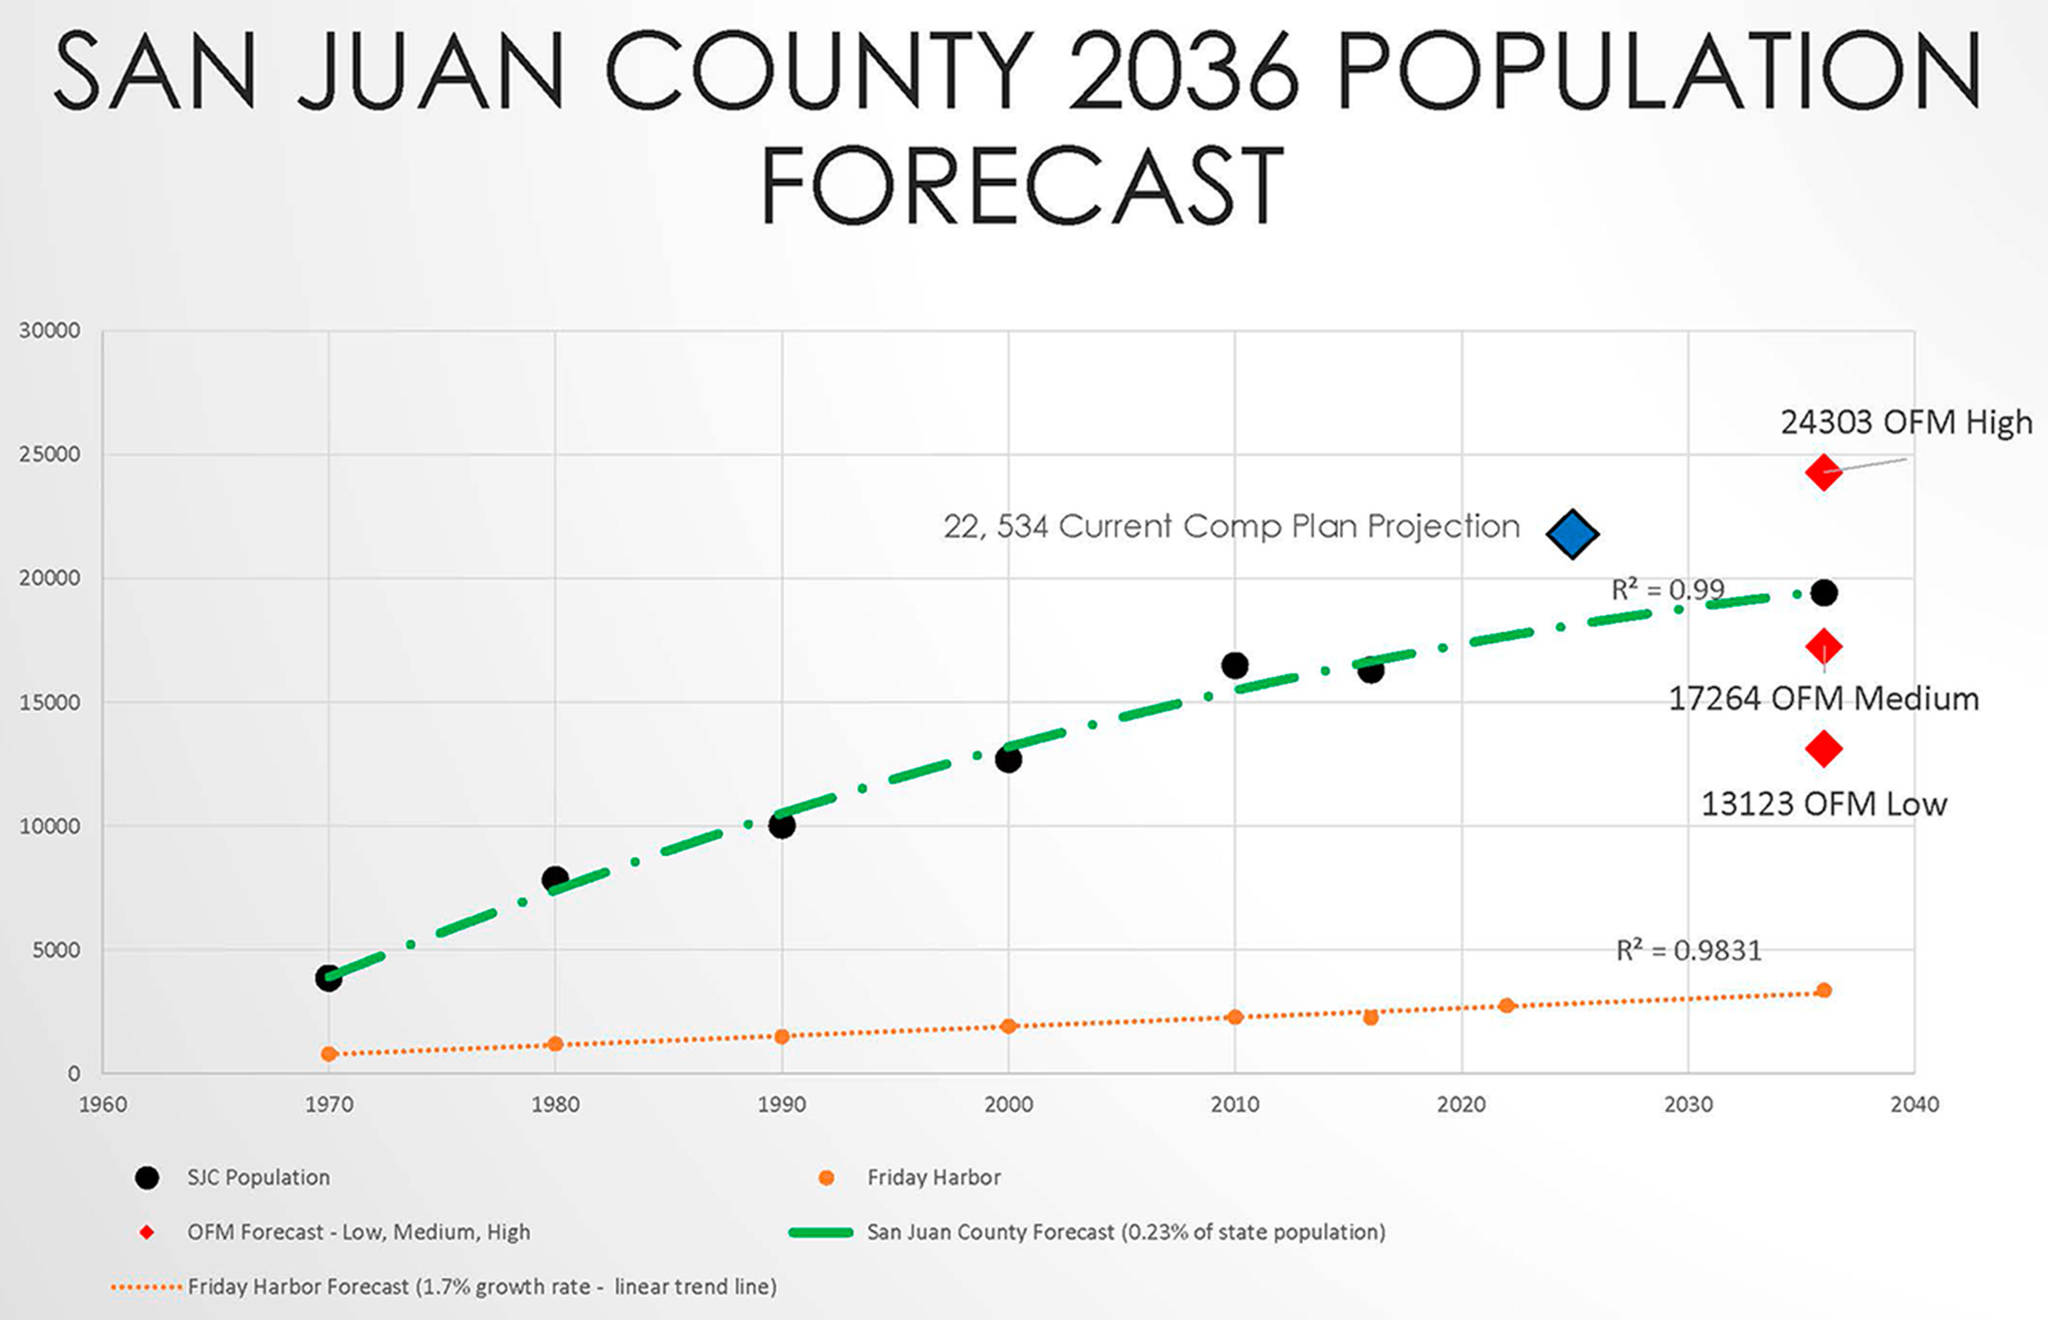 Lower population prediction than the last comprehensive plan update